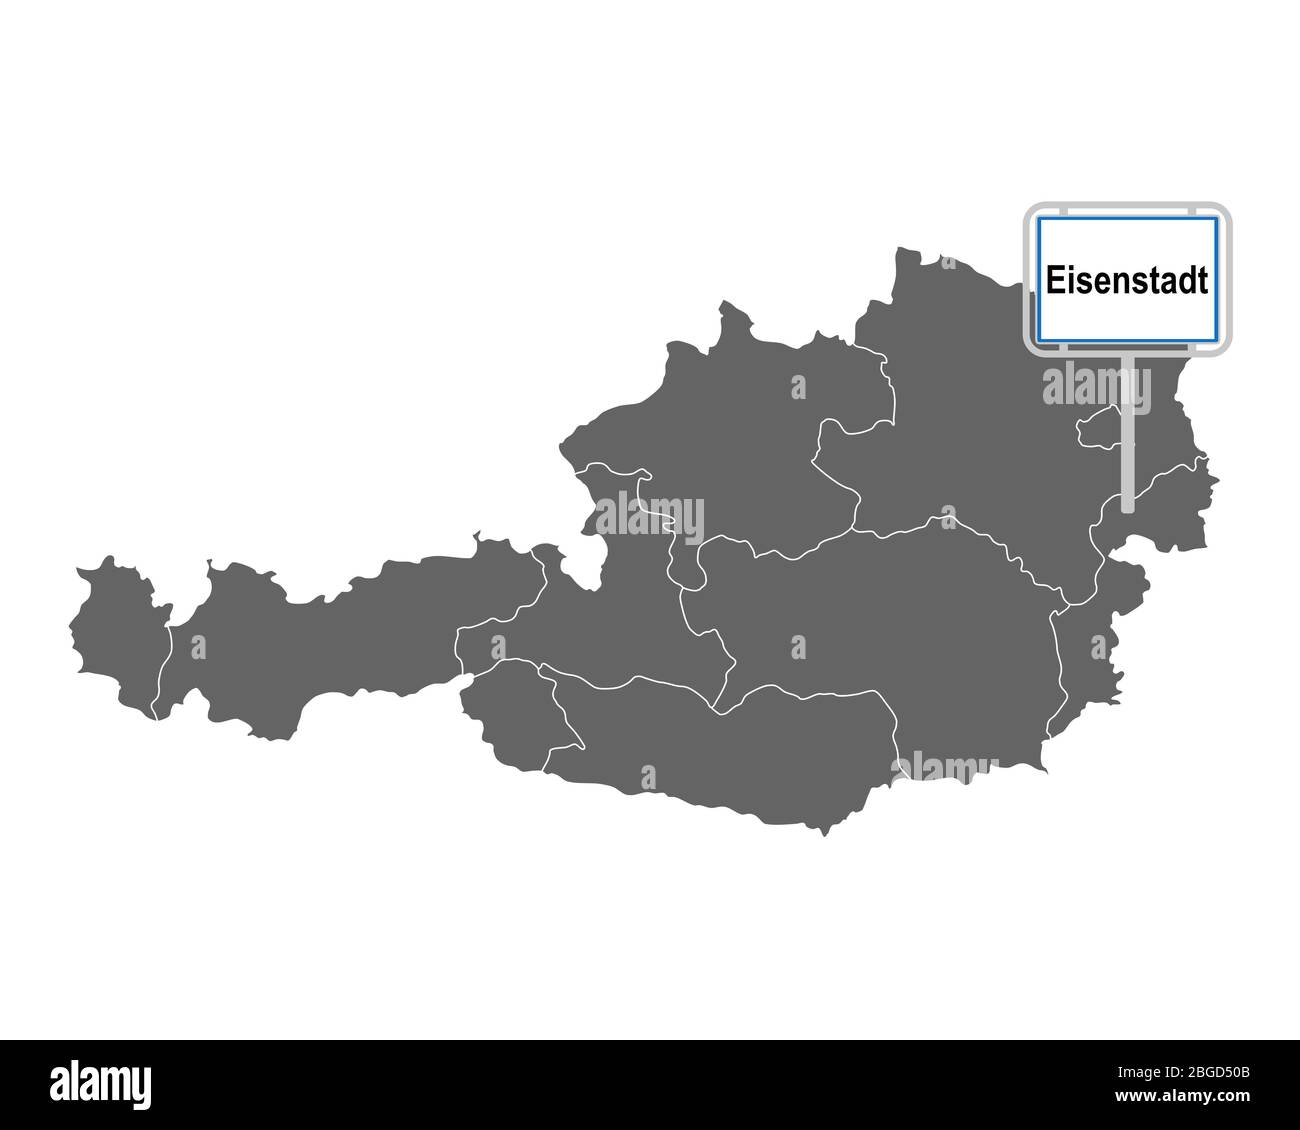 Map of Austria with road sign of Eisenstadt Stock Photo